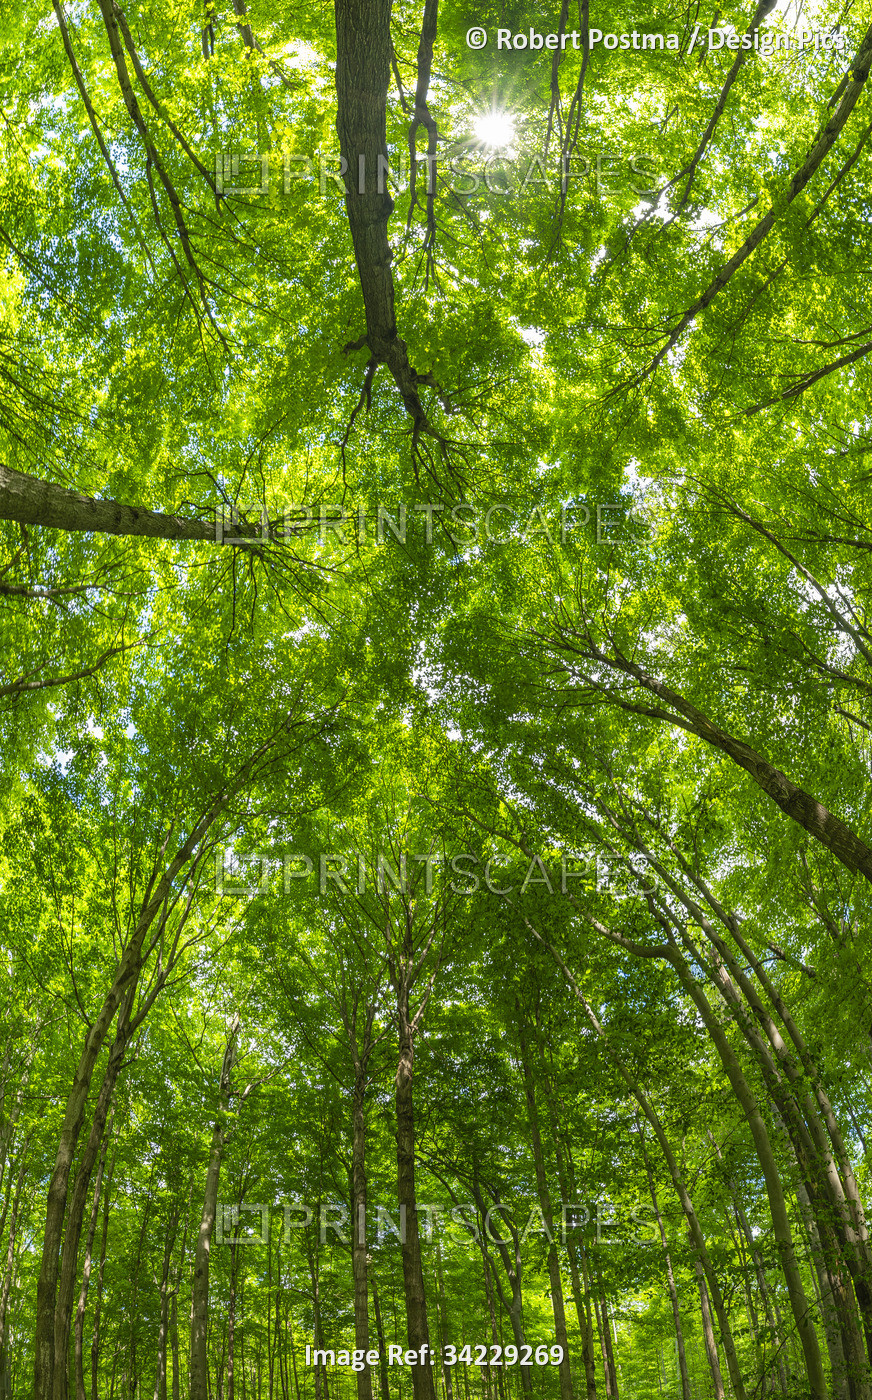 The beautiful summer foliage in the forests of Ontario become a vibrant green ...